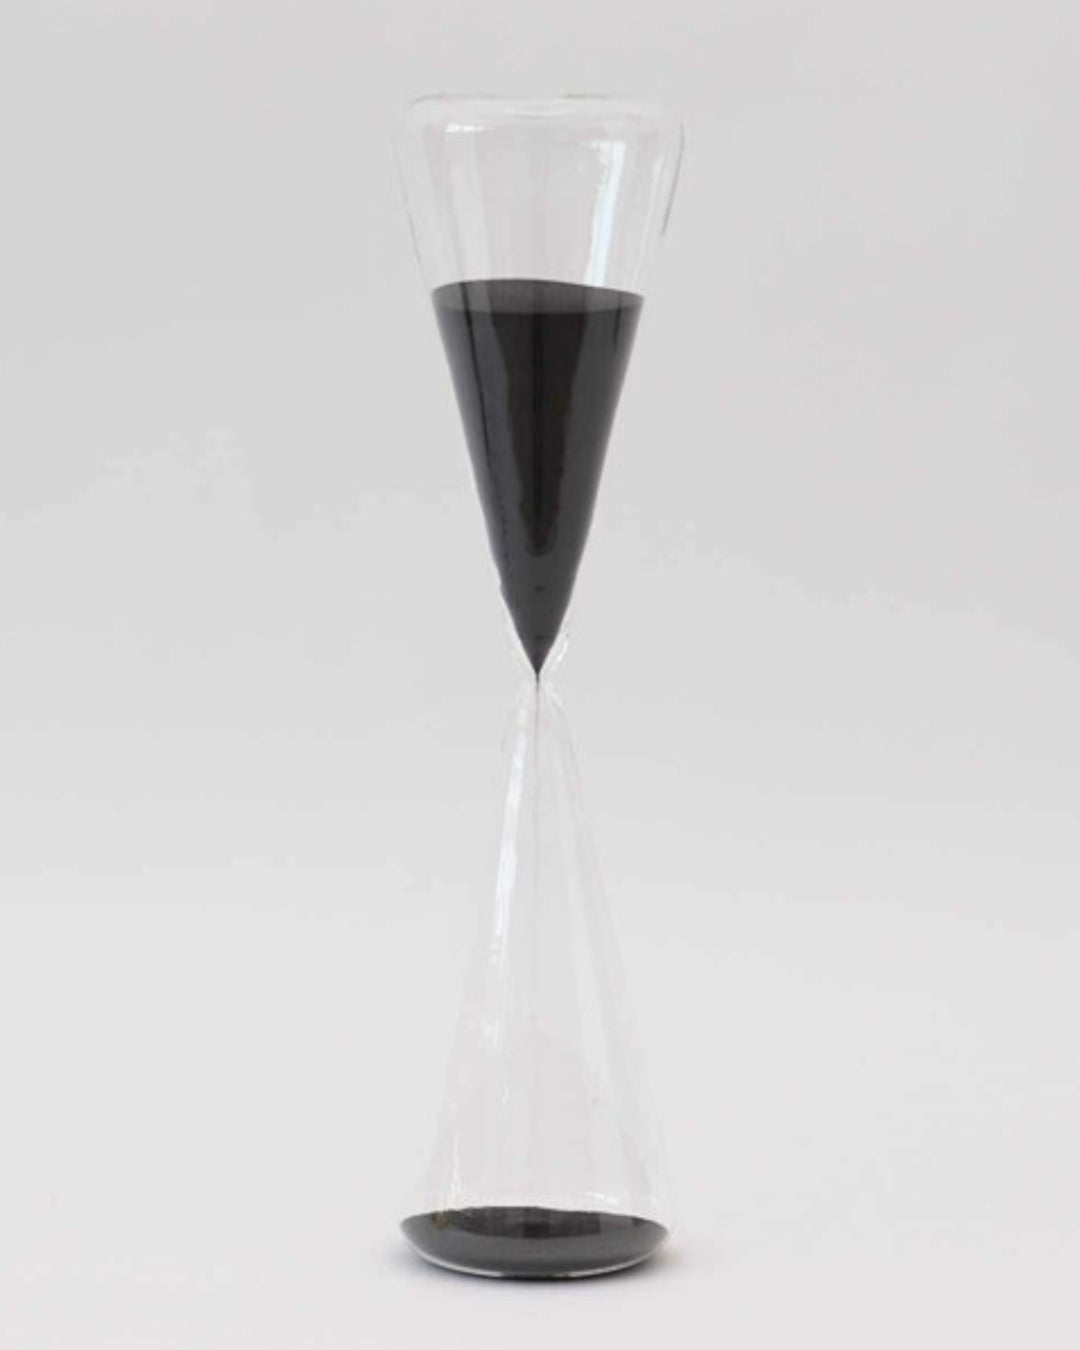 Iconic hourglass - 120 minutes